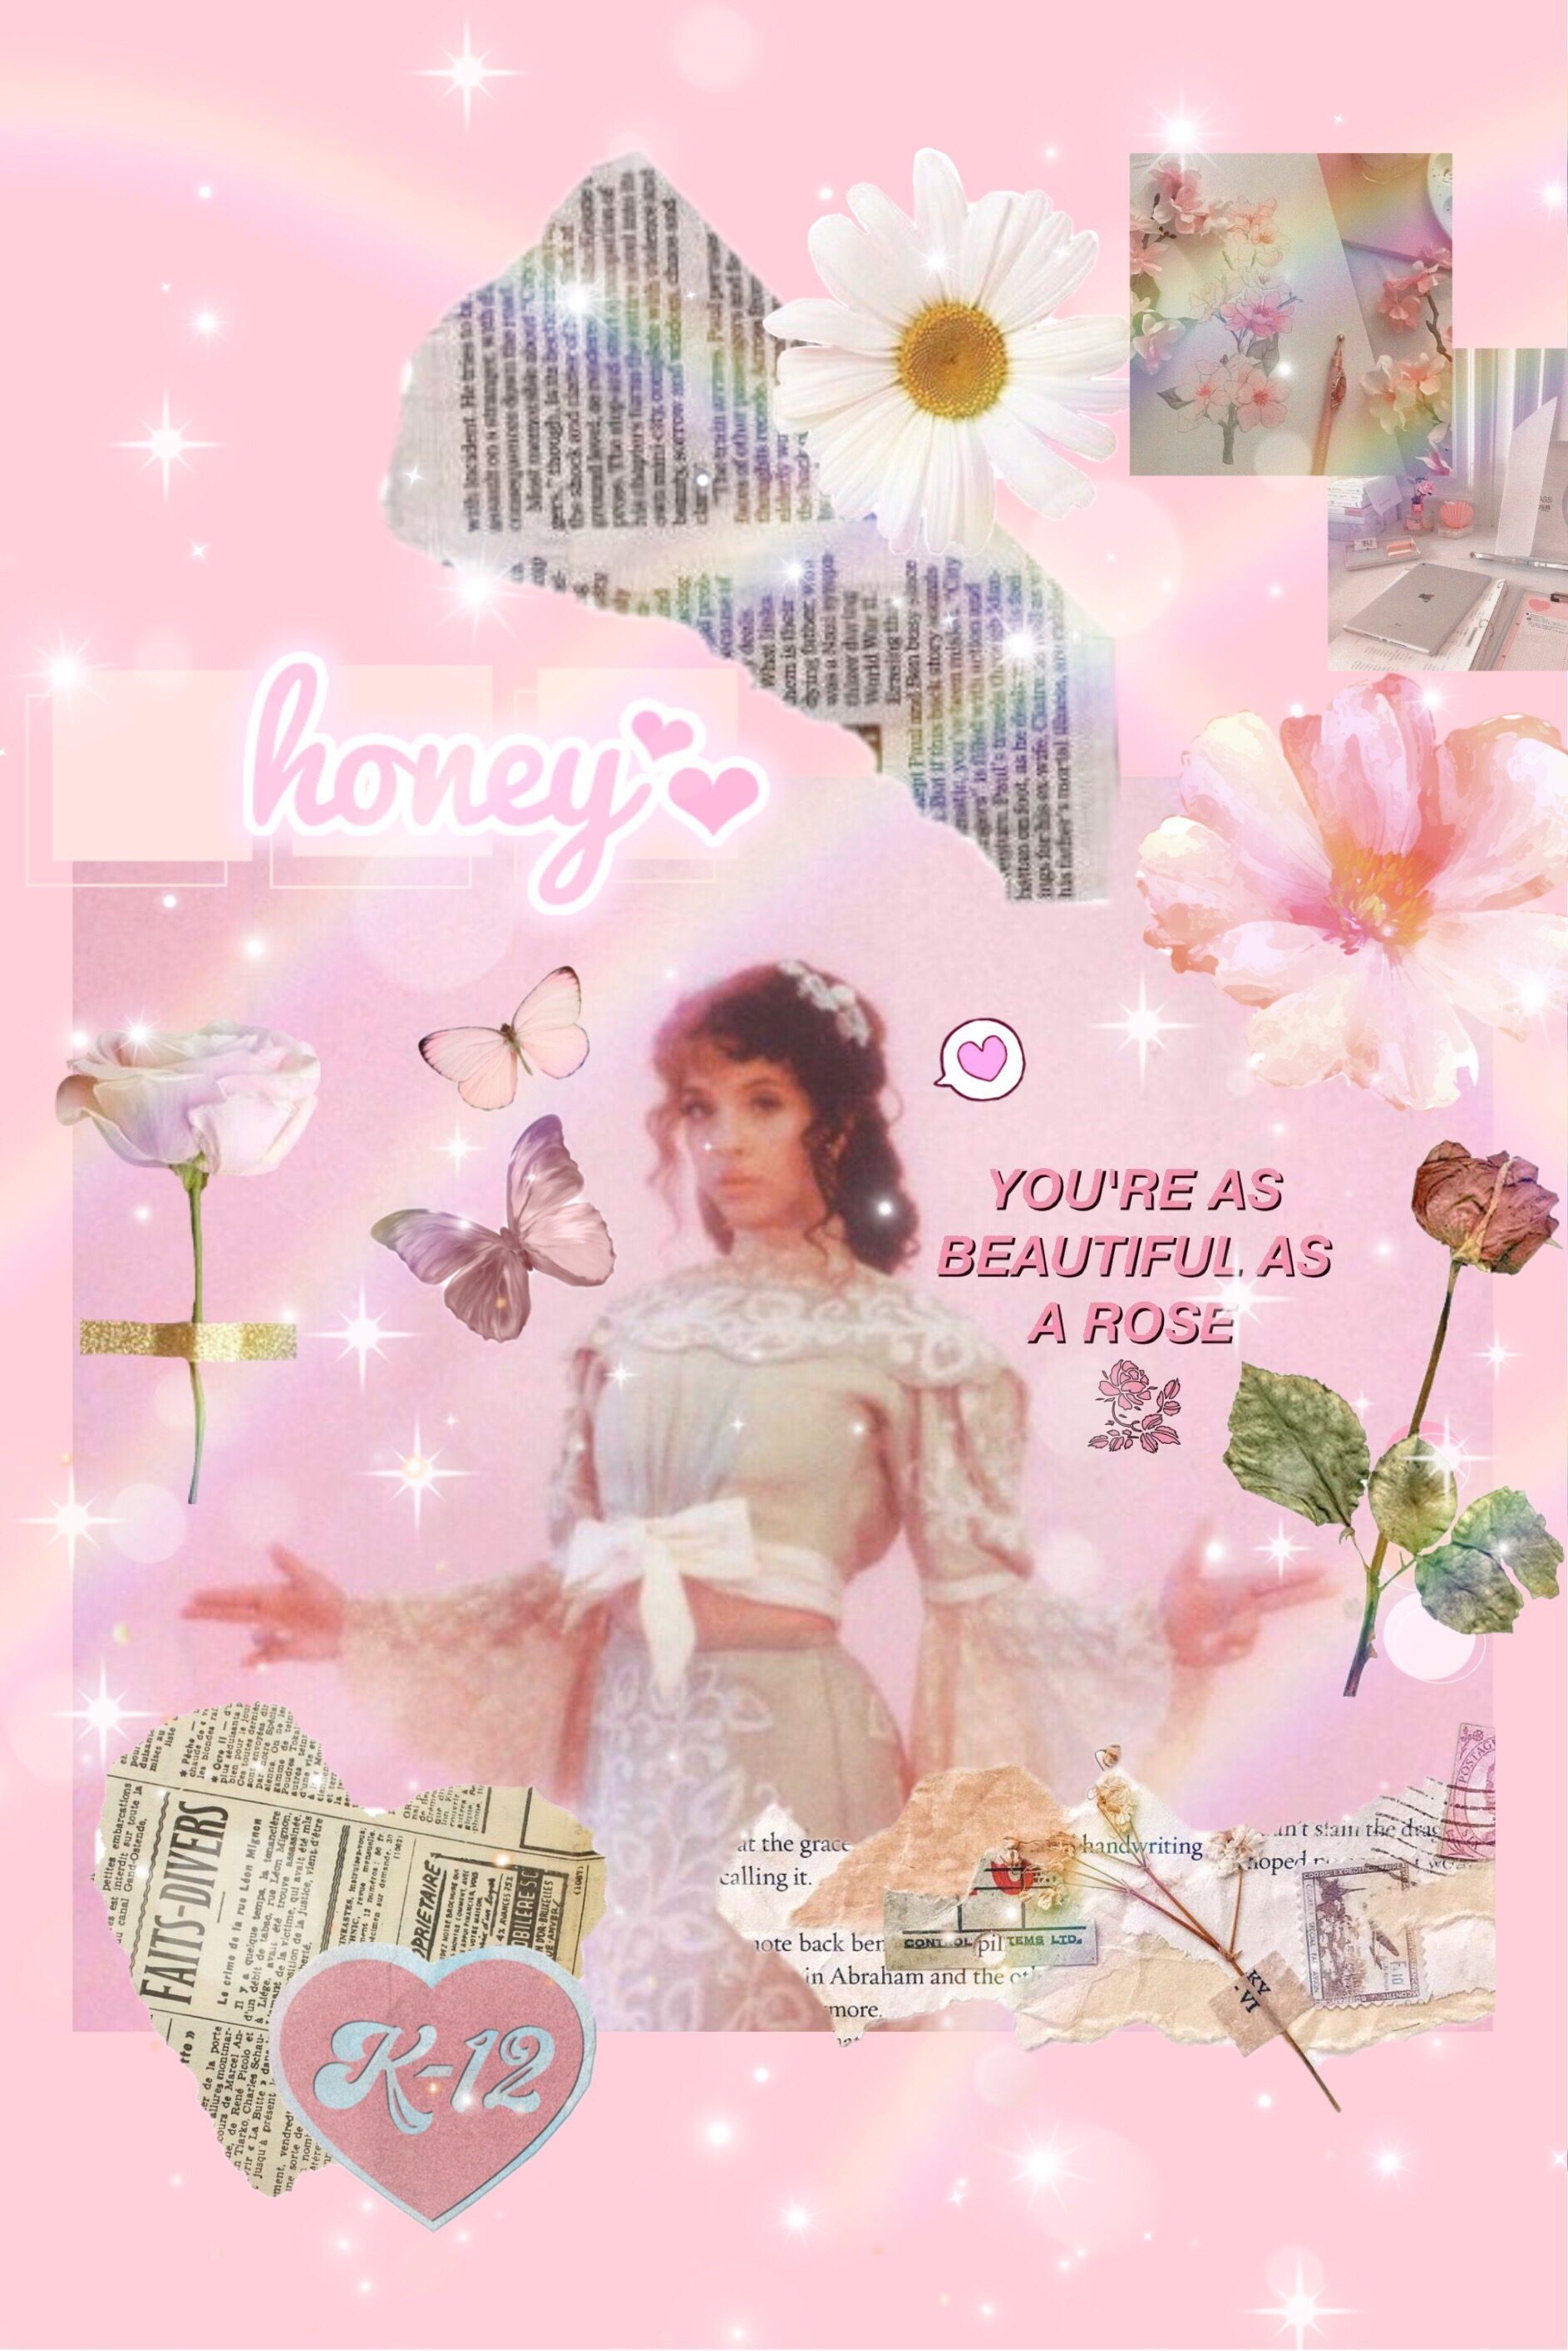 A collage of a woman, flowers, butterflies, and a heart on a pink background. - Melanie Martinez